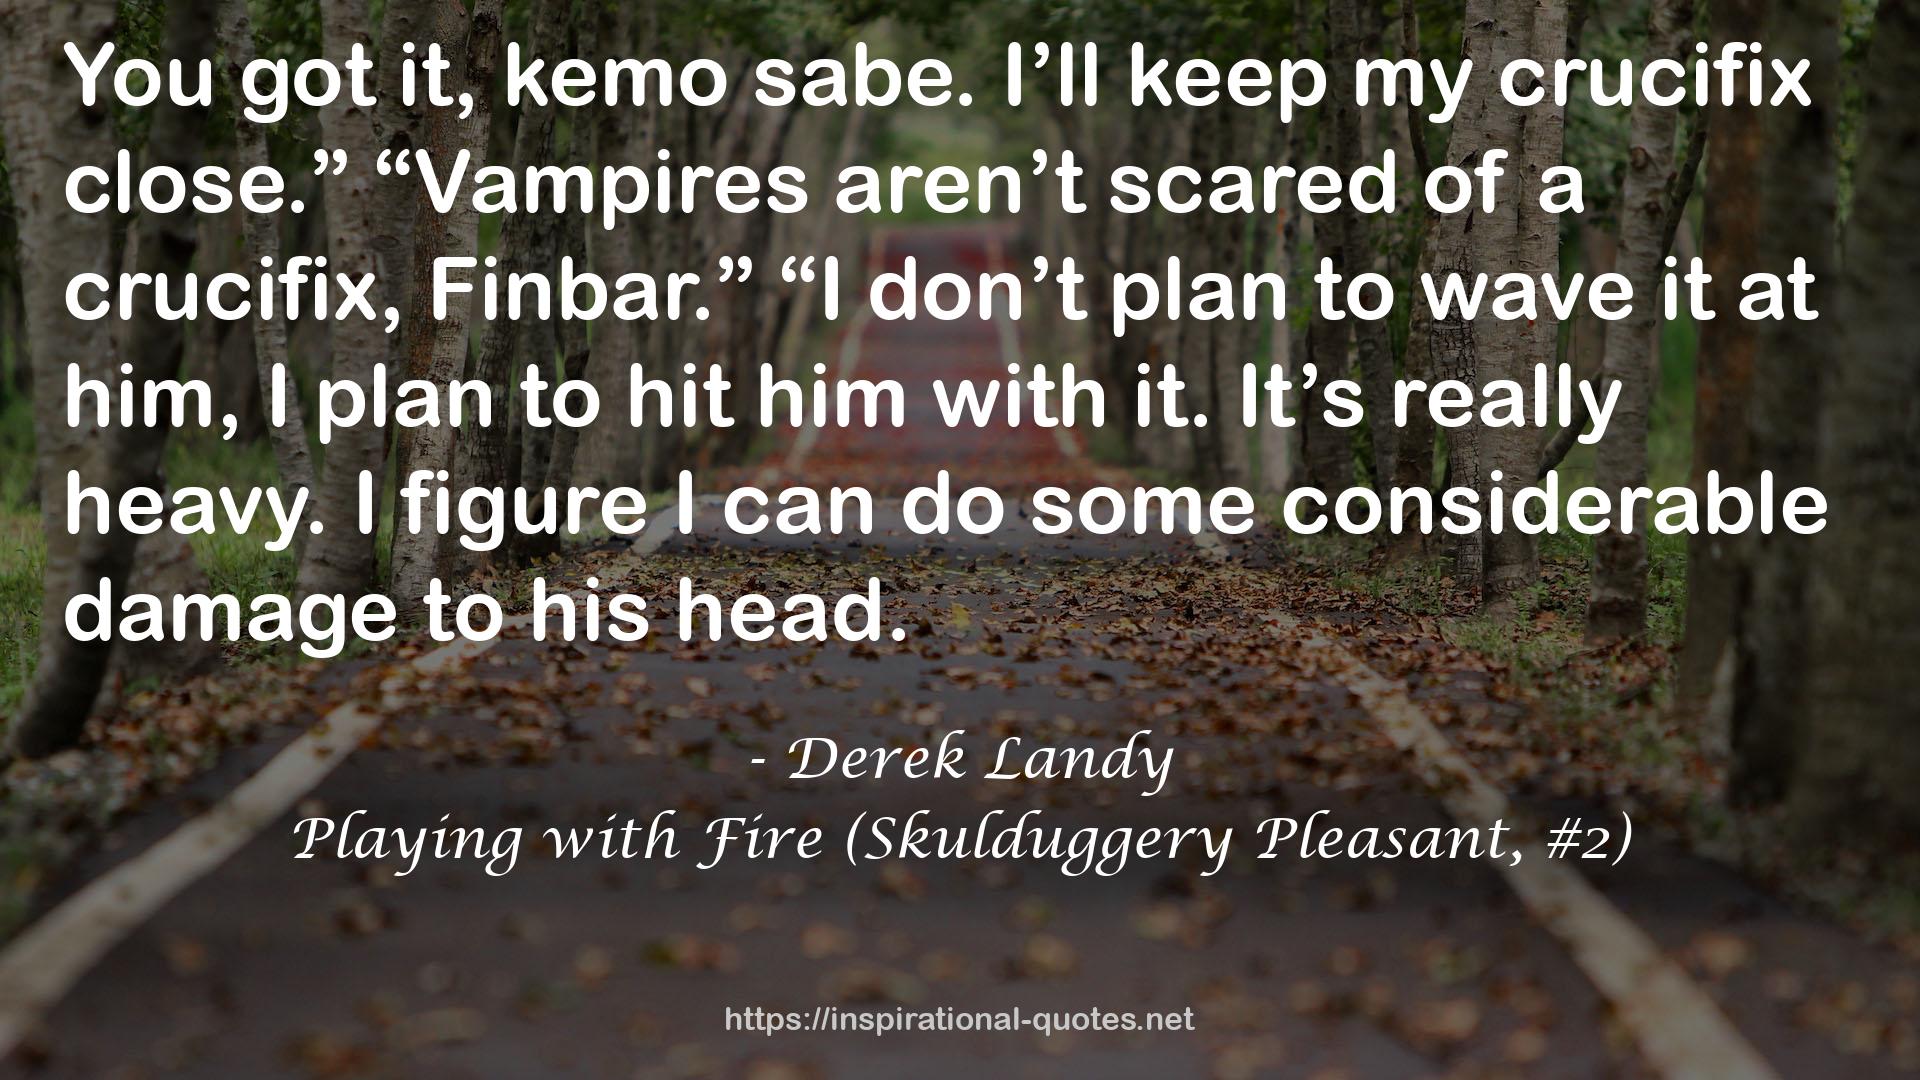 Playing with Fire (Skulduggery Pleasant, #2) QUOTES